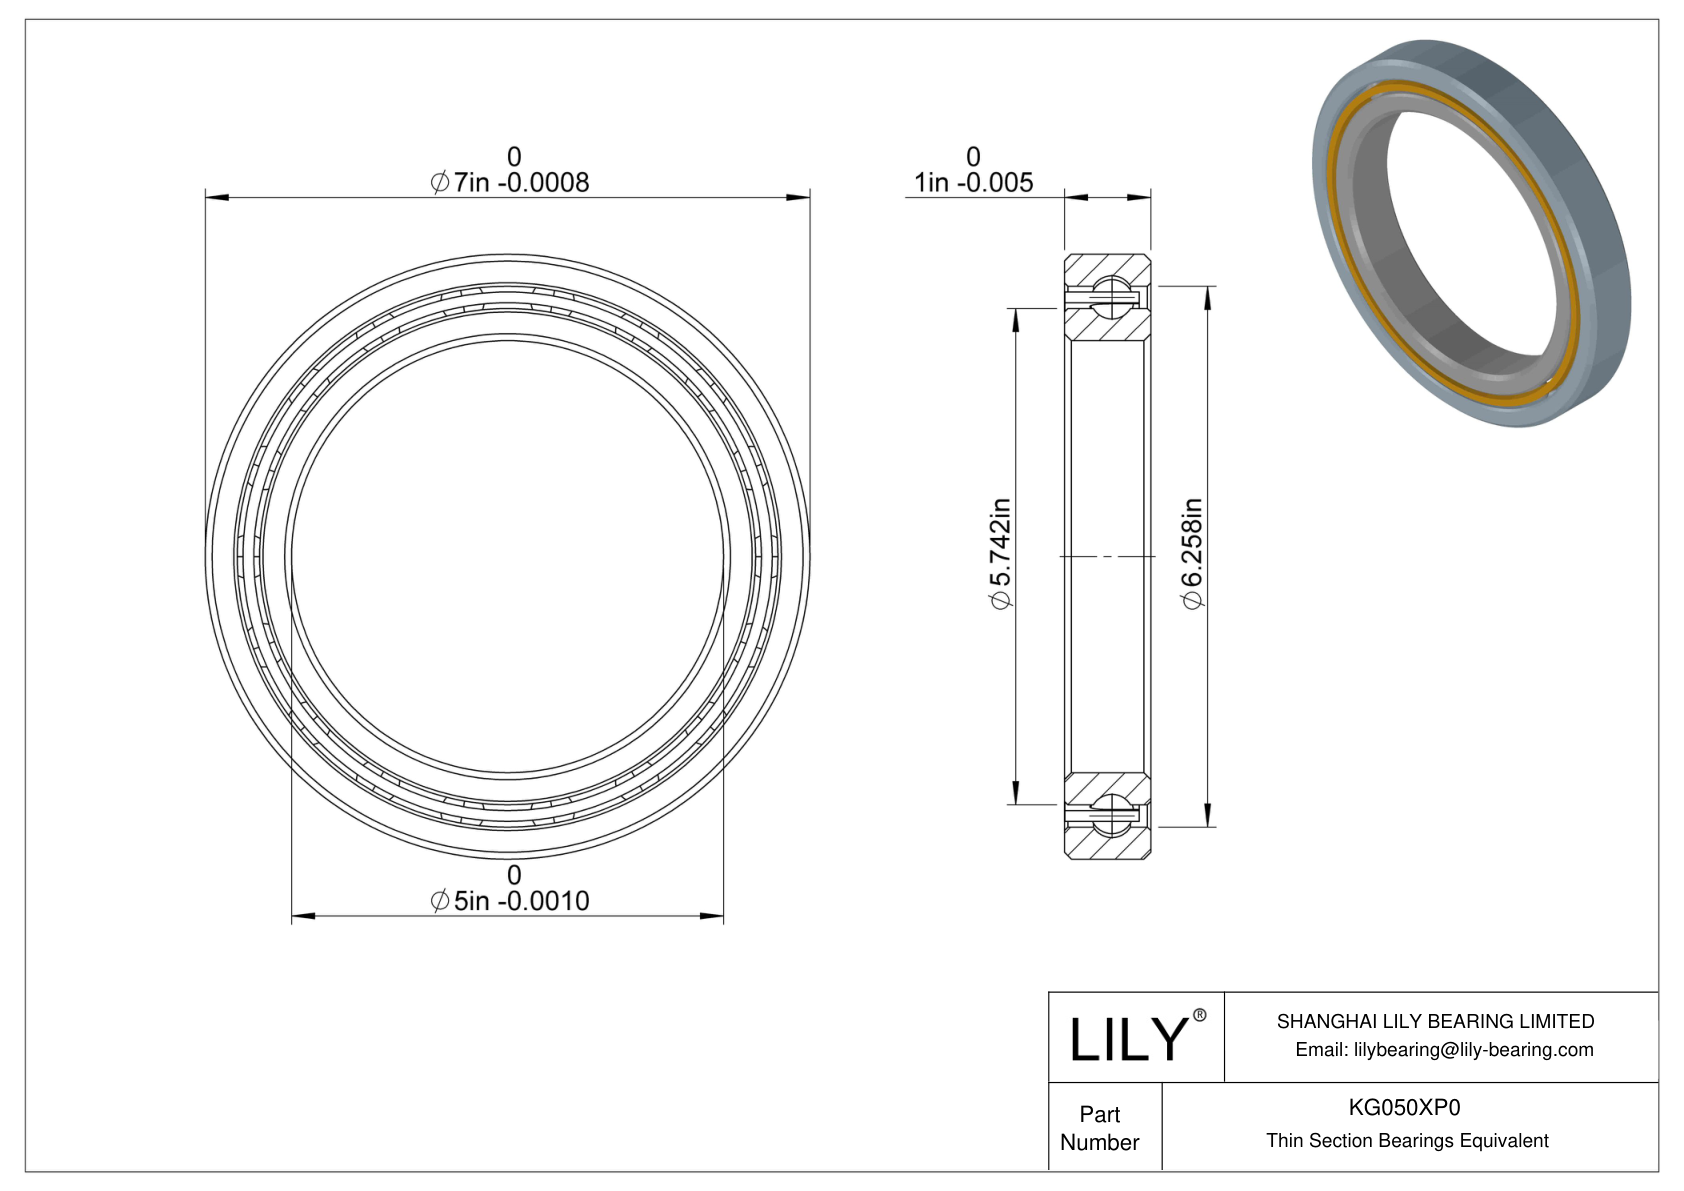 KG050XP0 Constant Section (CS) Bearings cad drawing